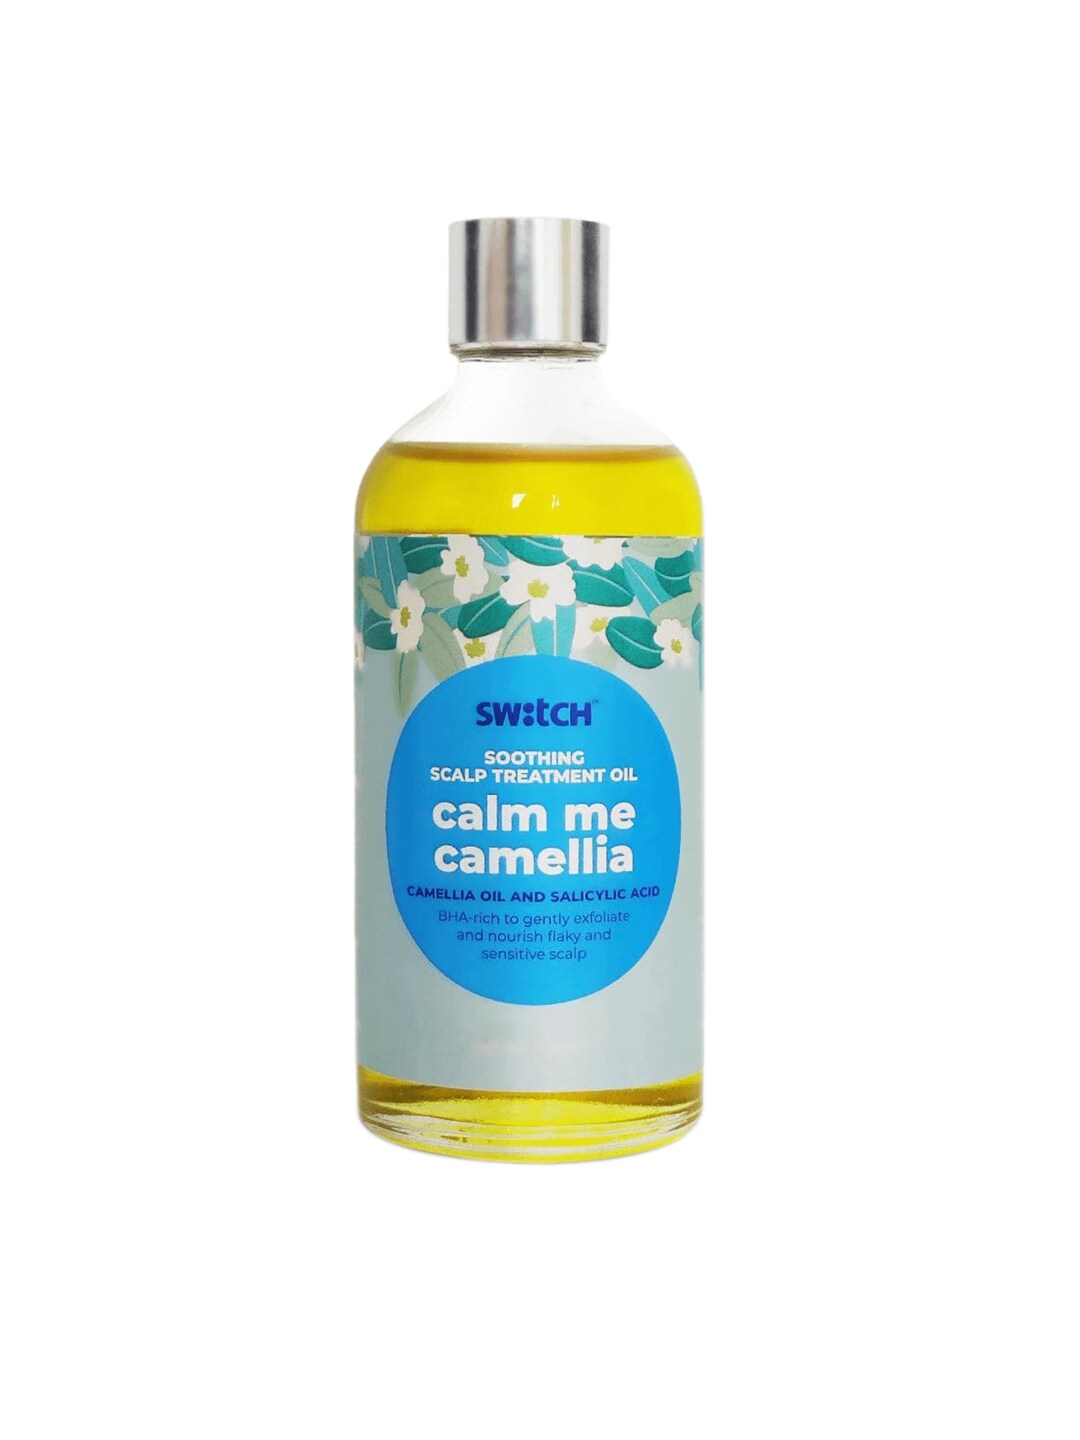 The Switch Fix Calm Me Camellia Soothing Scalp Treatment Oil 100 ml Price in India